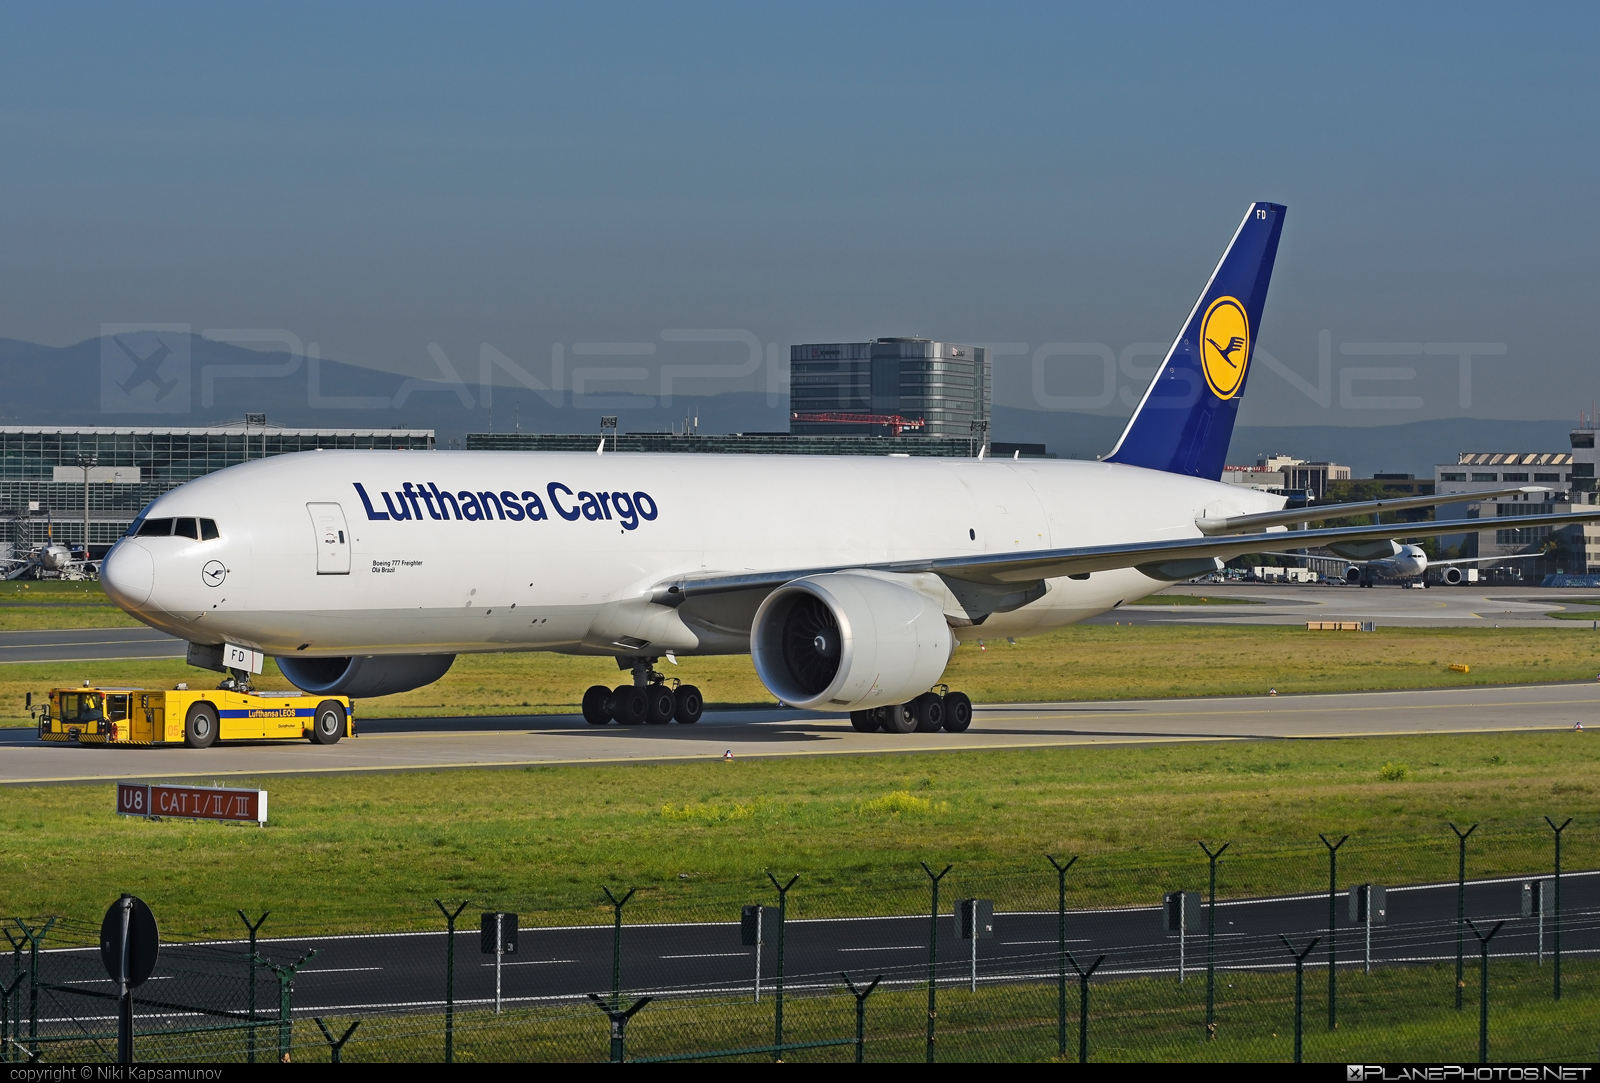 Boeing 777F - D-ALFD operated by Lufthansa Cargo #b777 #b777f #b777freighter #boeing #boeing777 #lufthansa #lufthansacargo #tripleseven